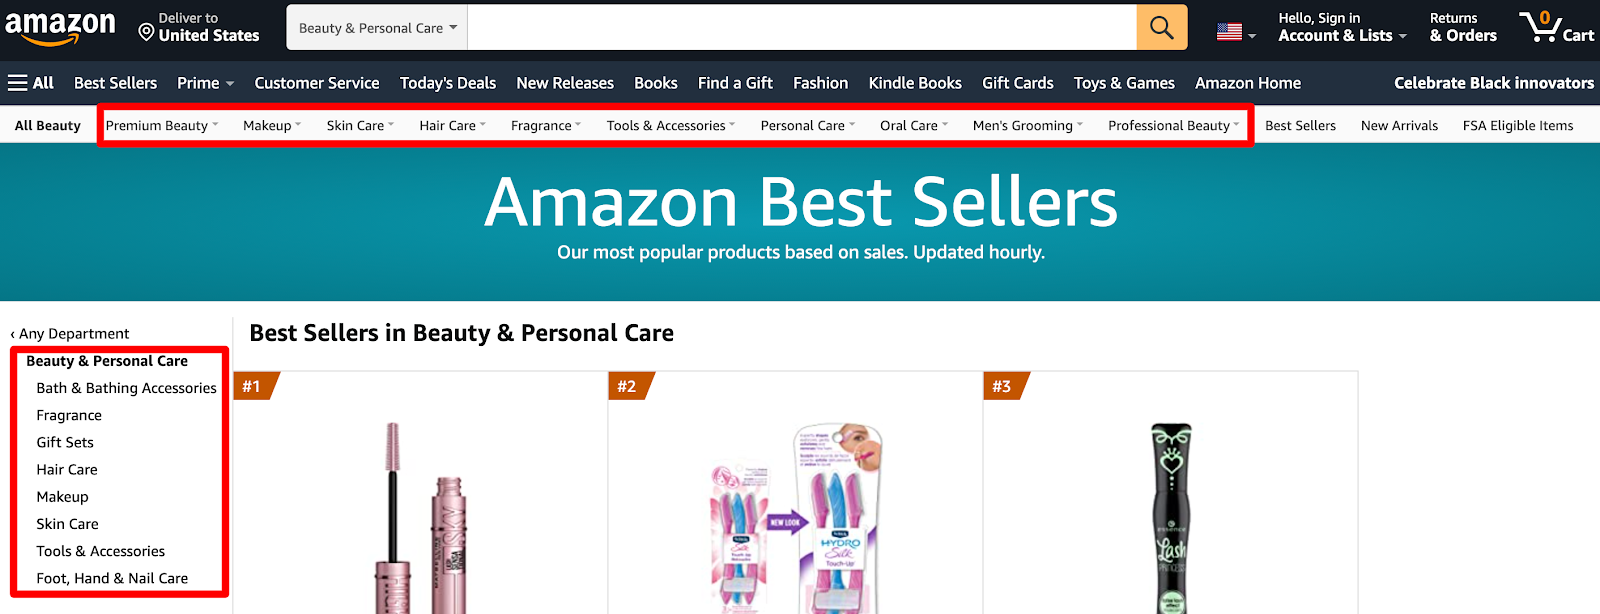 The Amazon Best Sellers page, with highlights on the top bar and left side navigation.